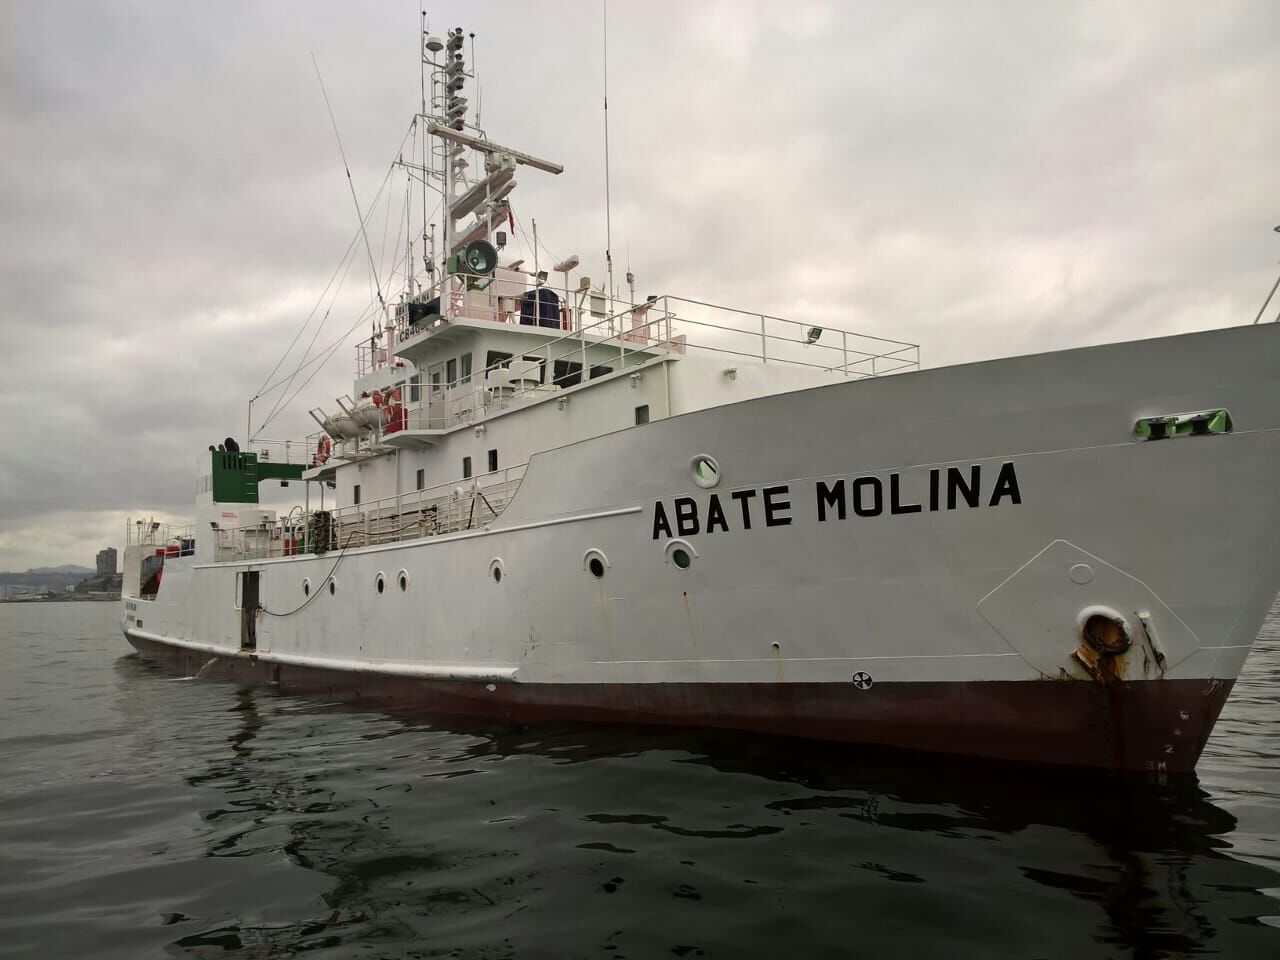 Abate Molina vessel sailed off to research common hake